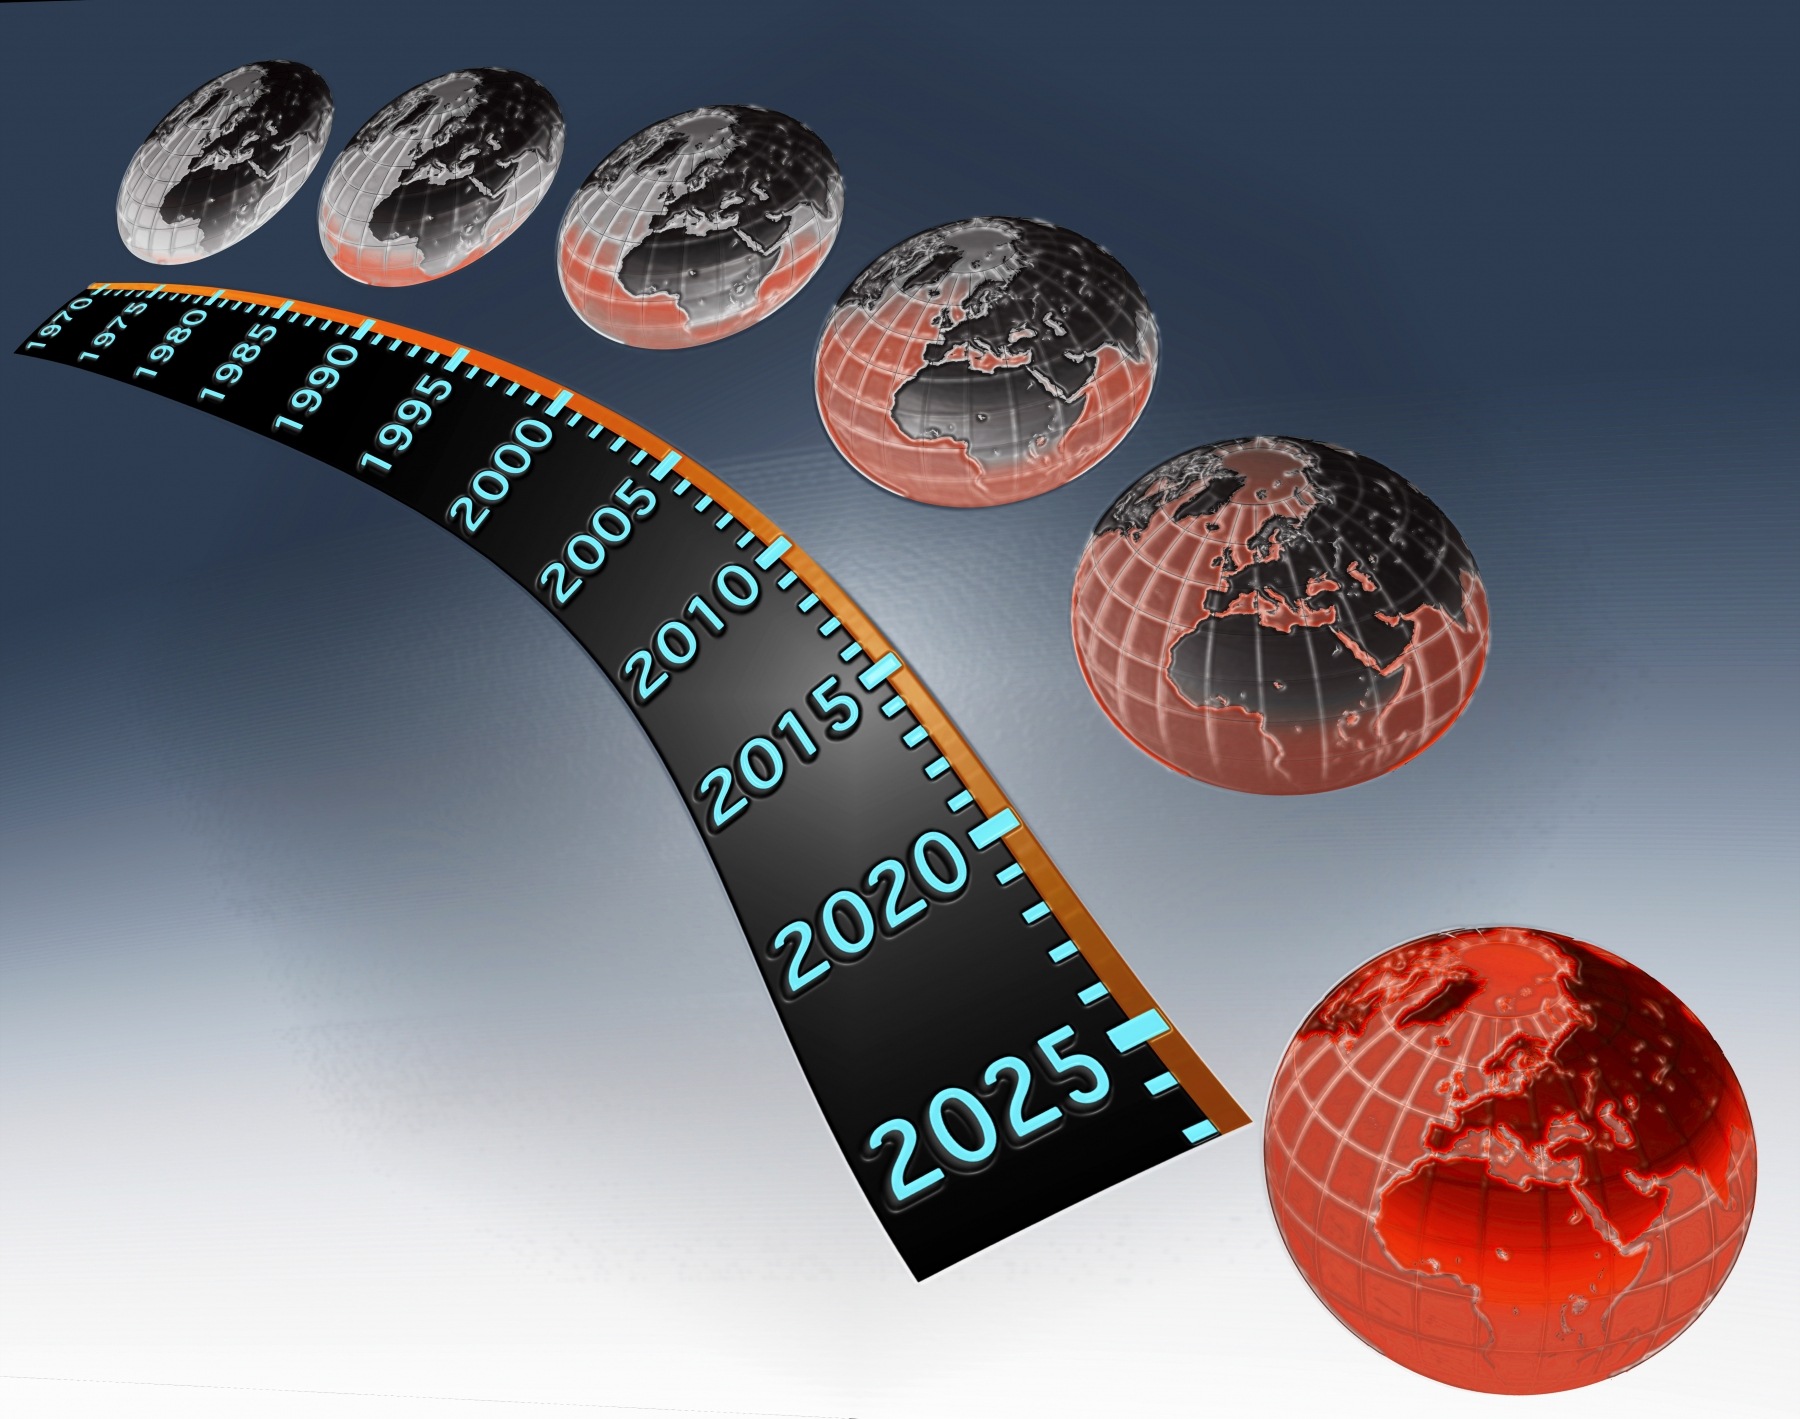 The gradual worsening of global warming from 1970 to 2025